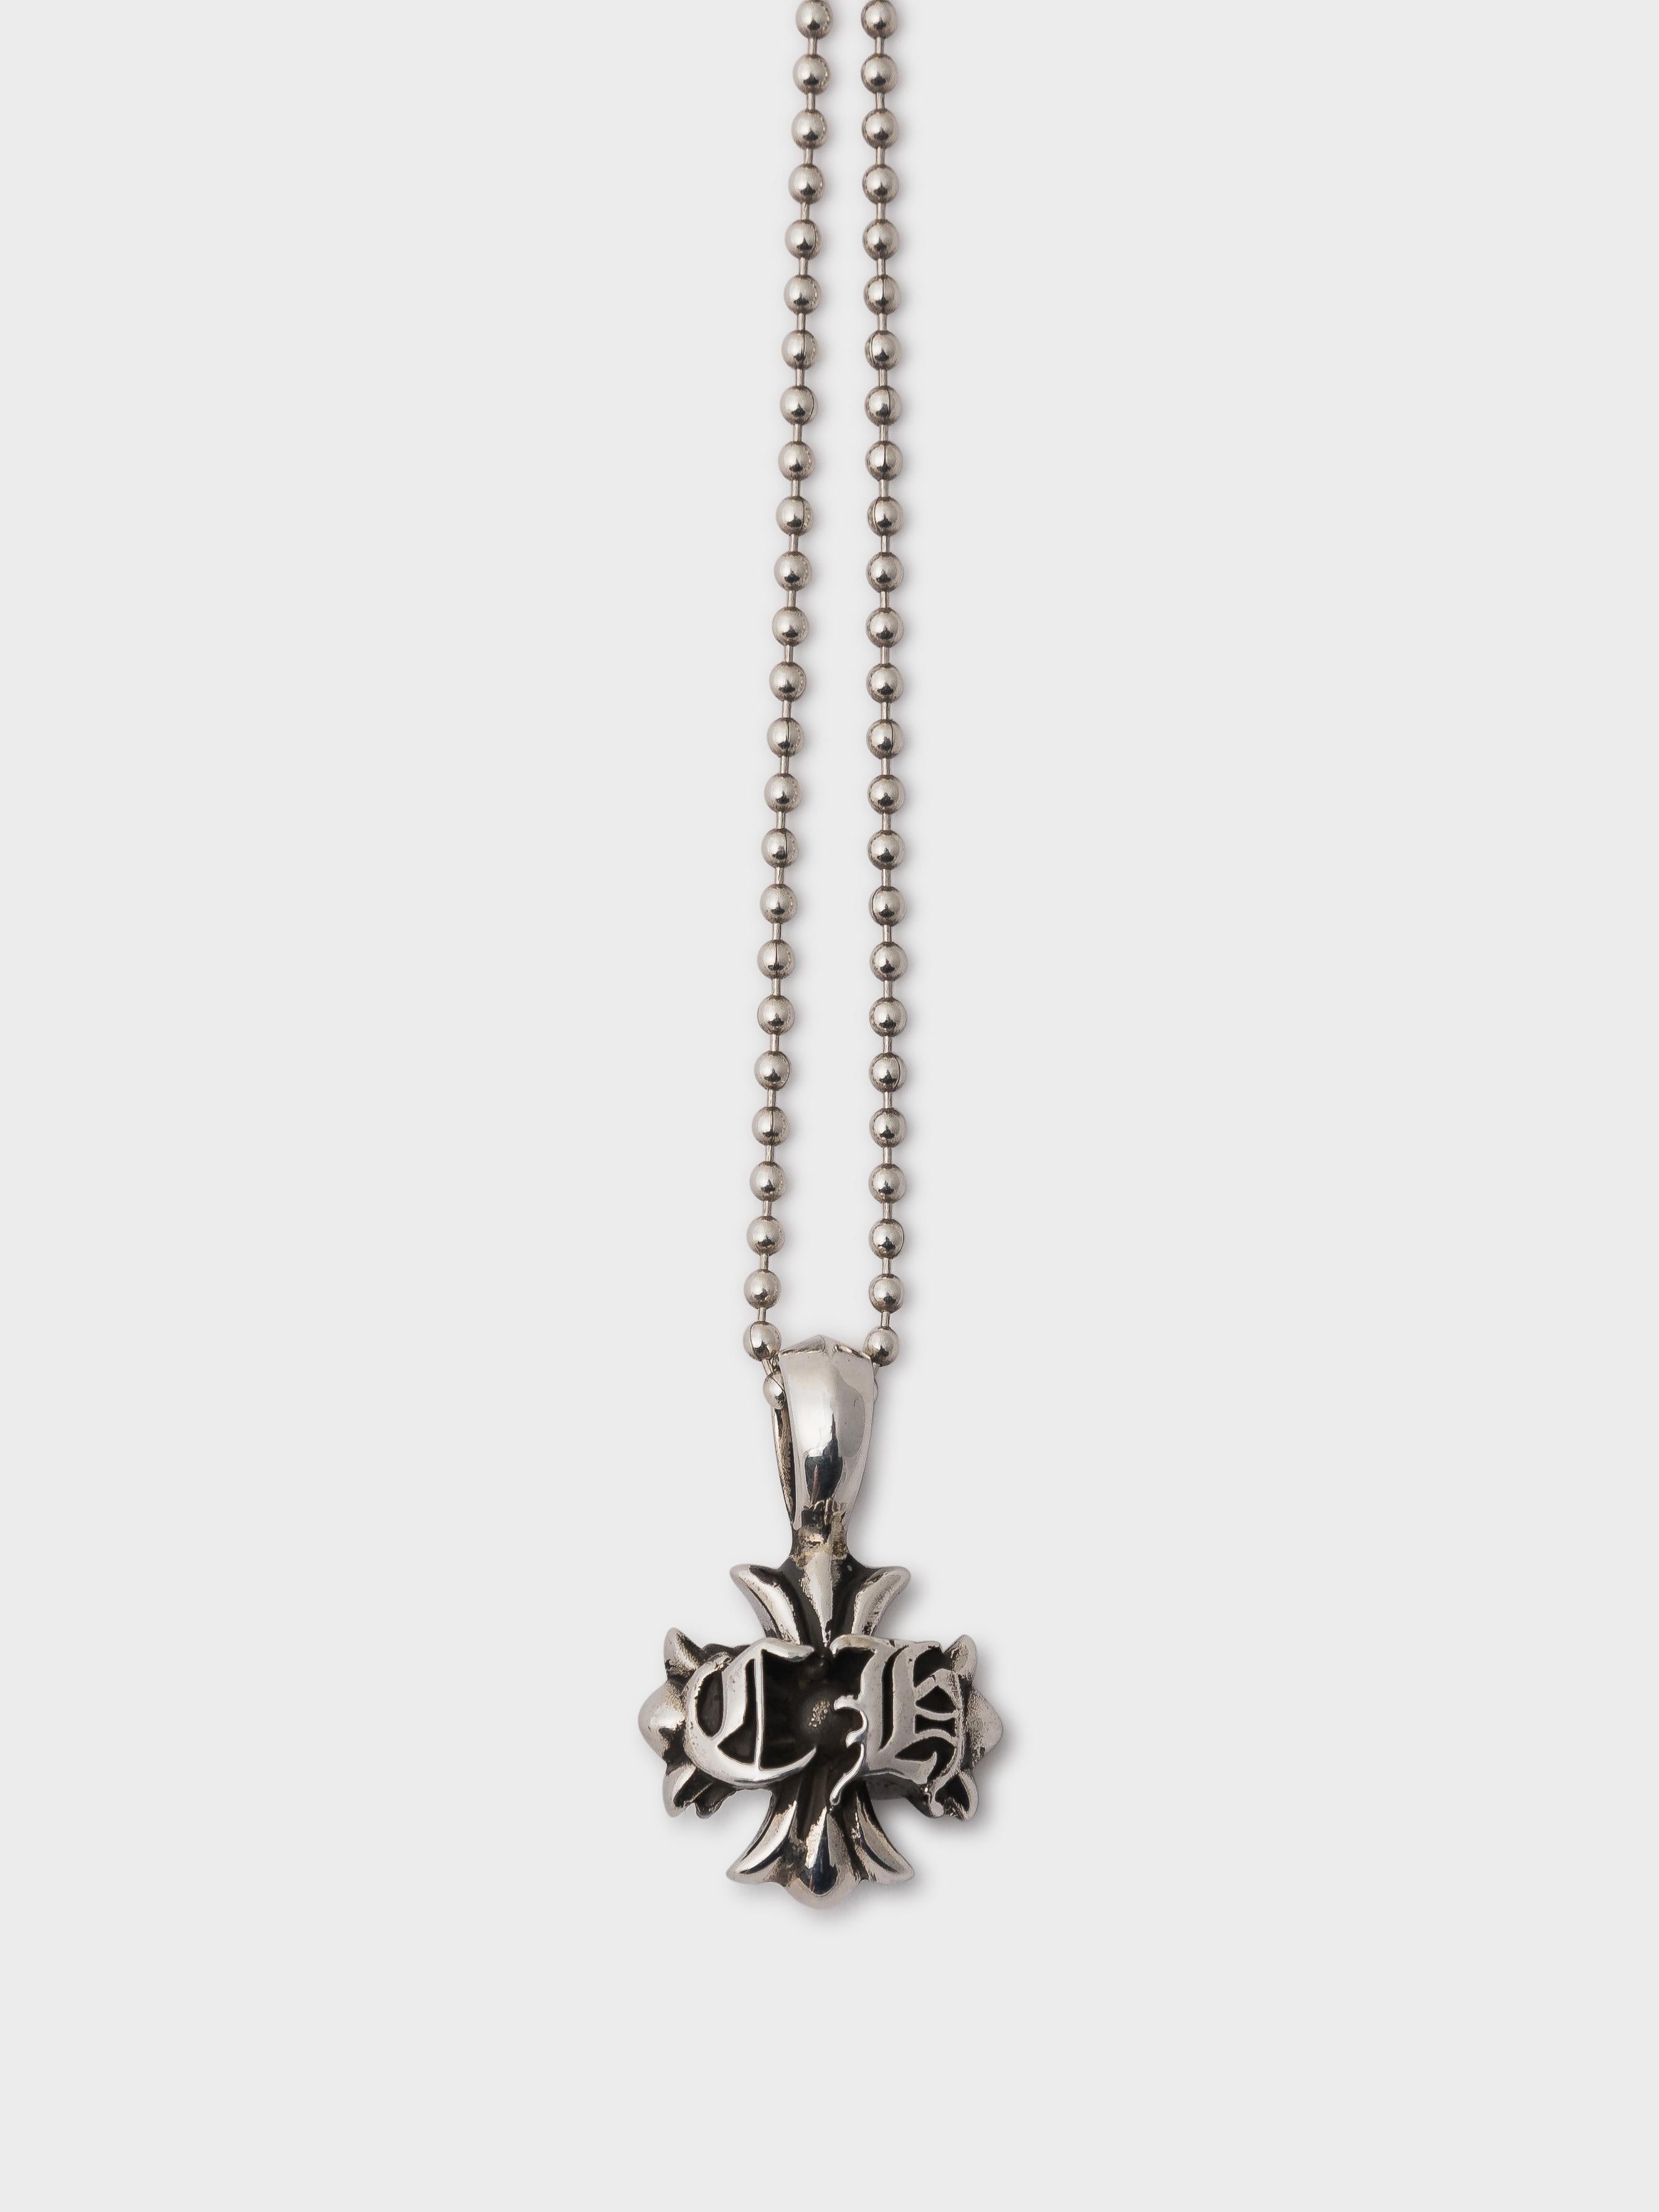 ✓ Authenticated

Our trained in-house authentication experts have reviewed this item to ensure that it is original. We guarantee its authenticity.

Here is a gently used CH Letter Plus Necklace from Chrome Hearts.

Condition: Like new 

